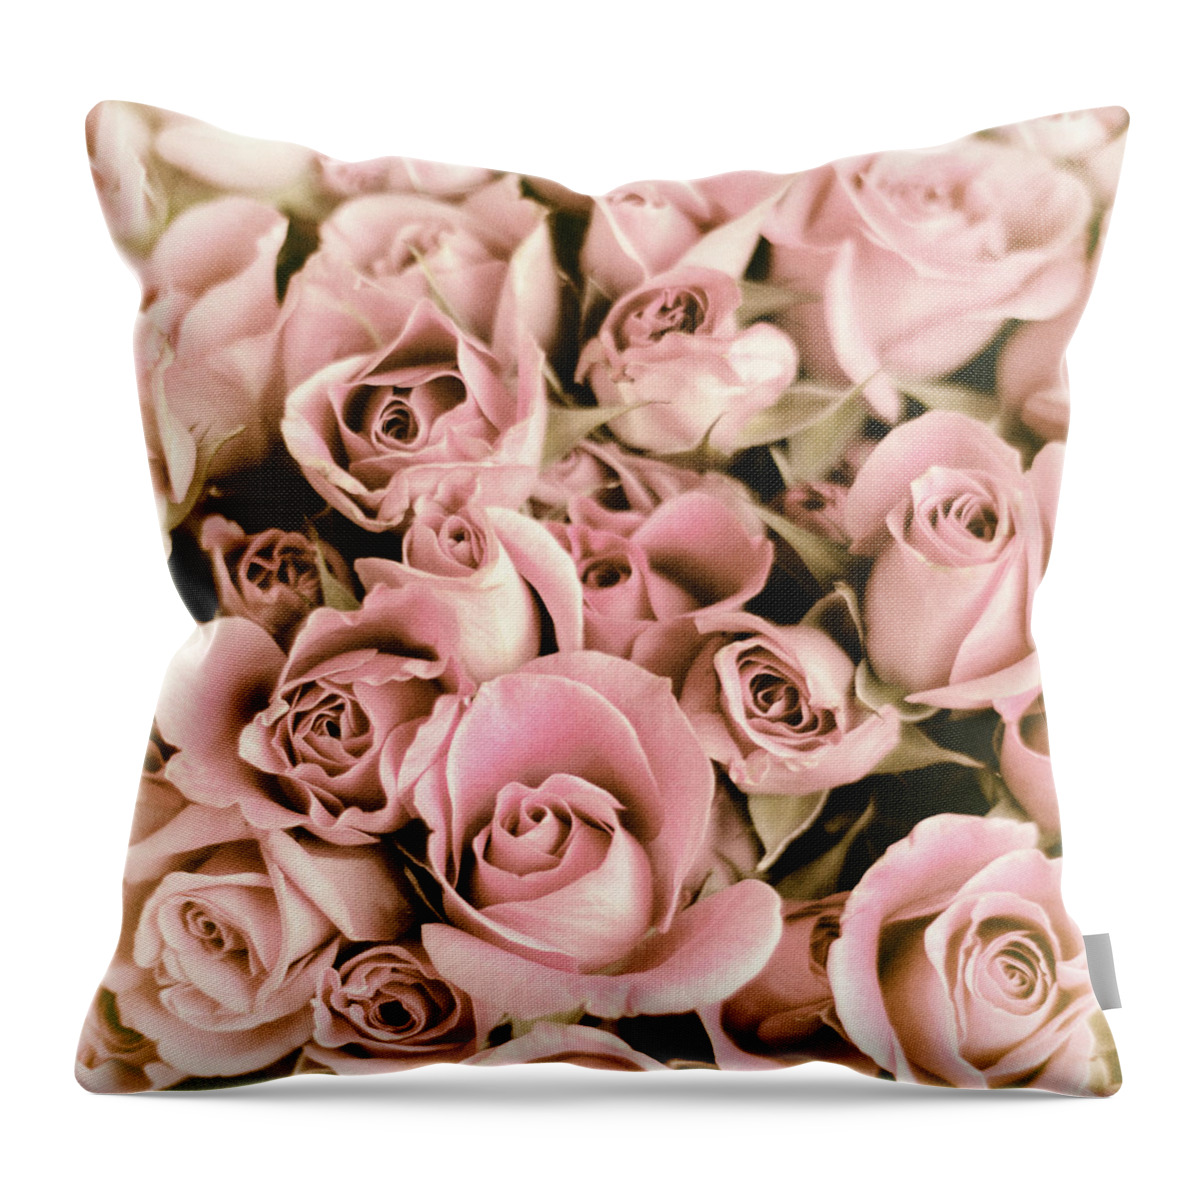 Roses Throw Pillow featuring the photograph Reticent Rose by Jessica Jenney